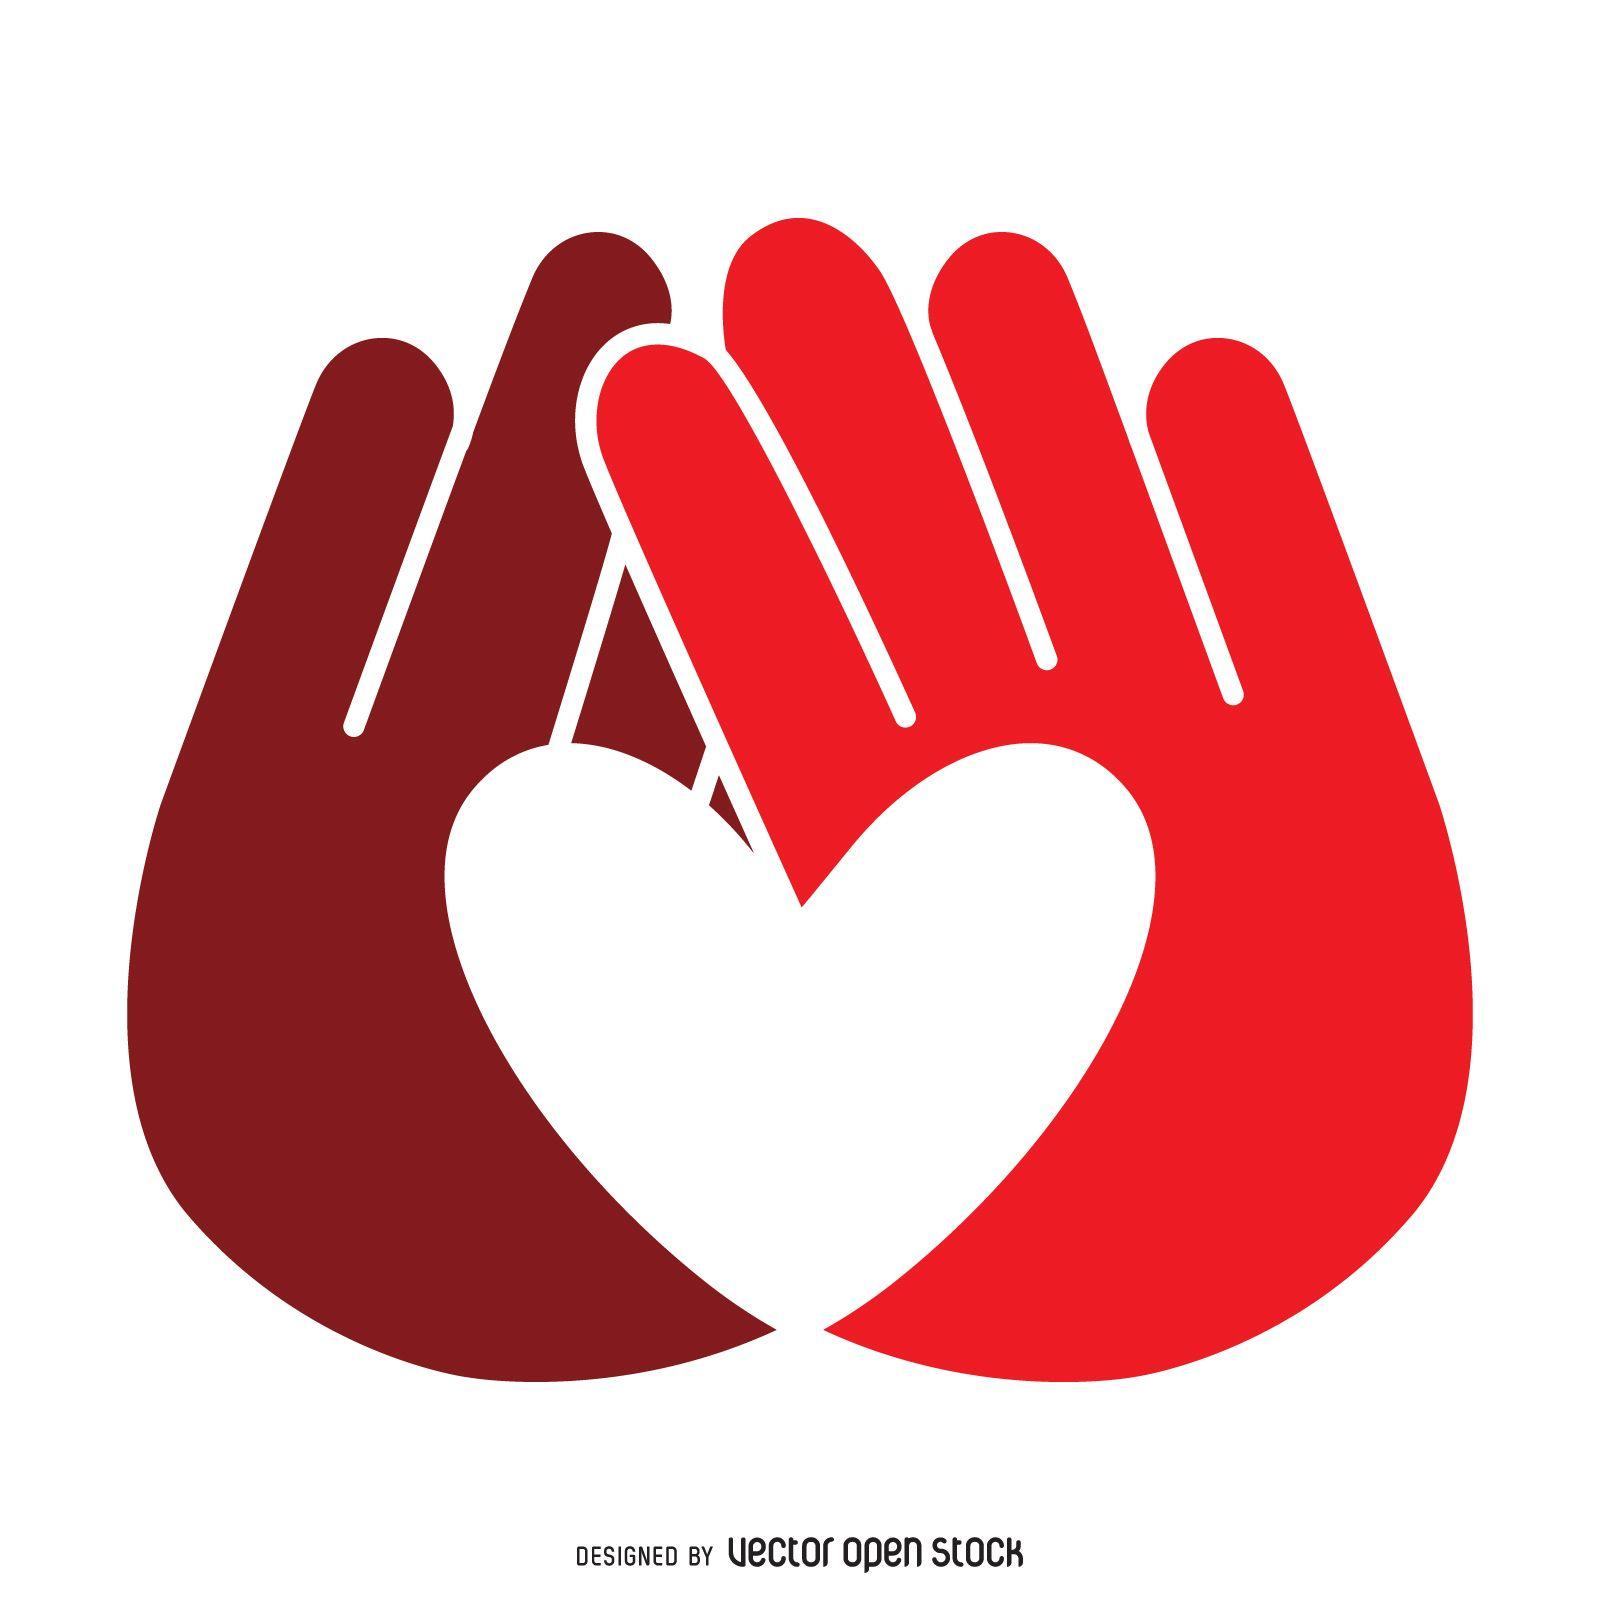 Two Red Hands Logo - Logo template design featuring two hands that together make a heart